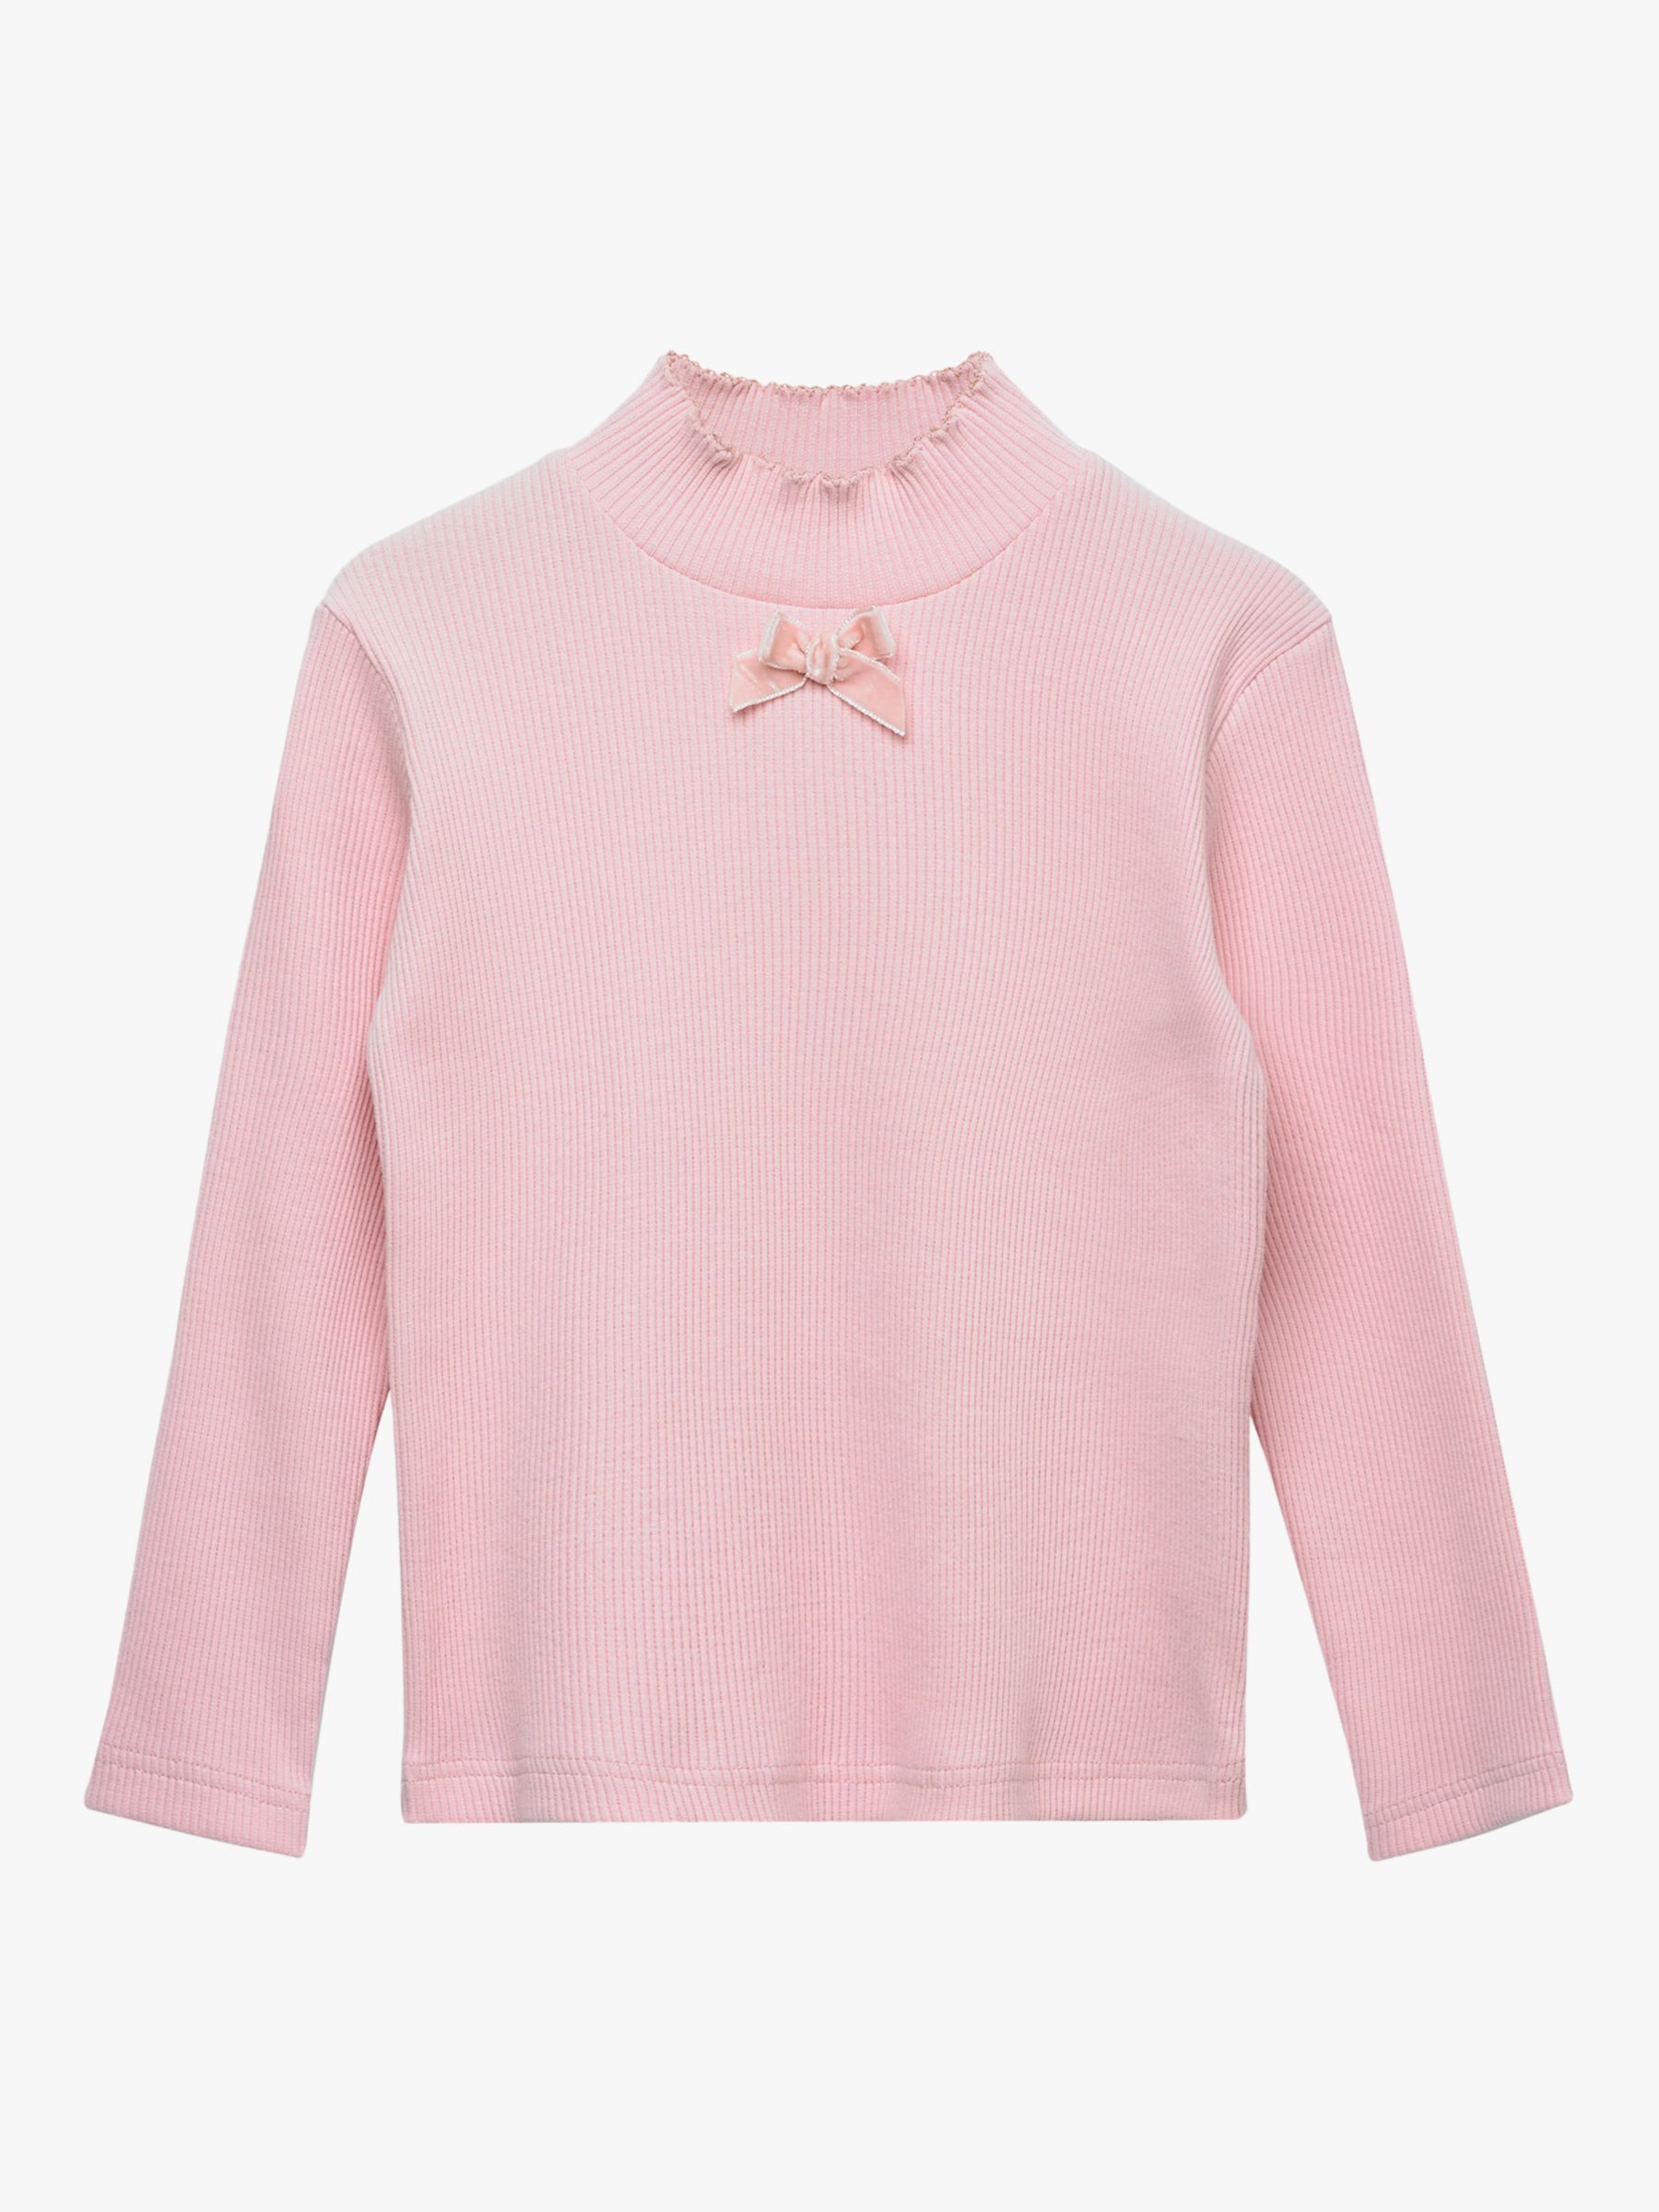 Trotters Kids' Grace Bow Stretch Cotton Top, Dusty Pink at John Lewis ...